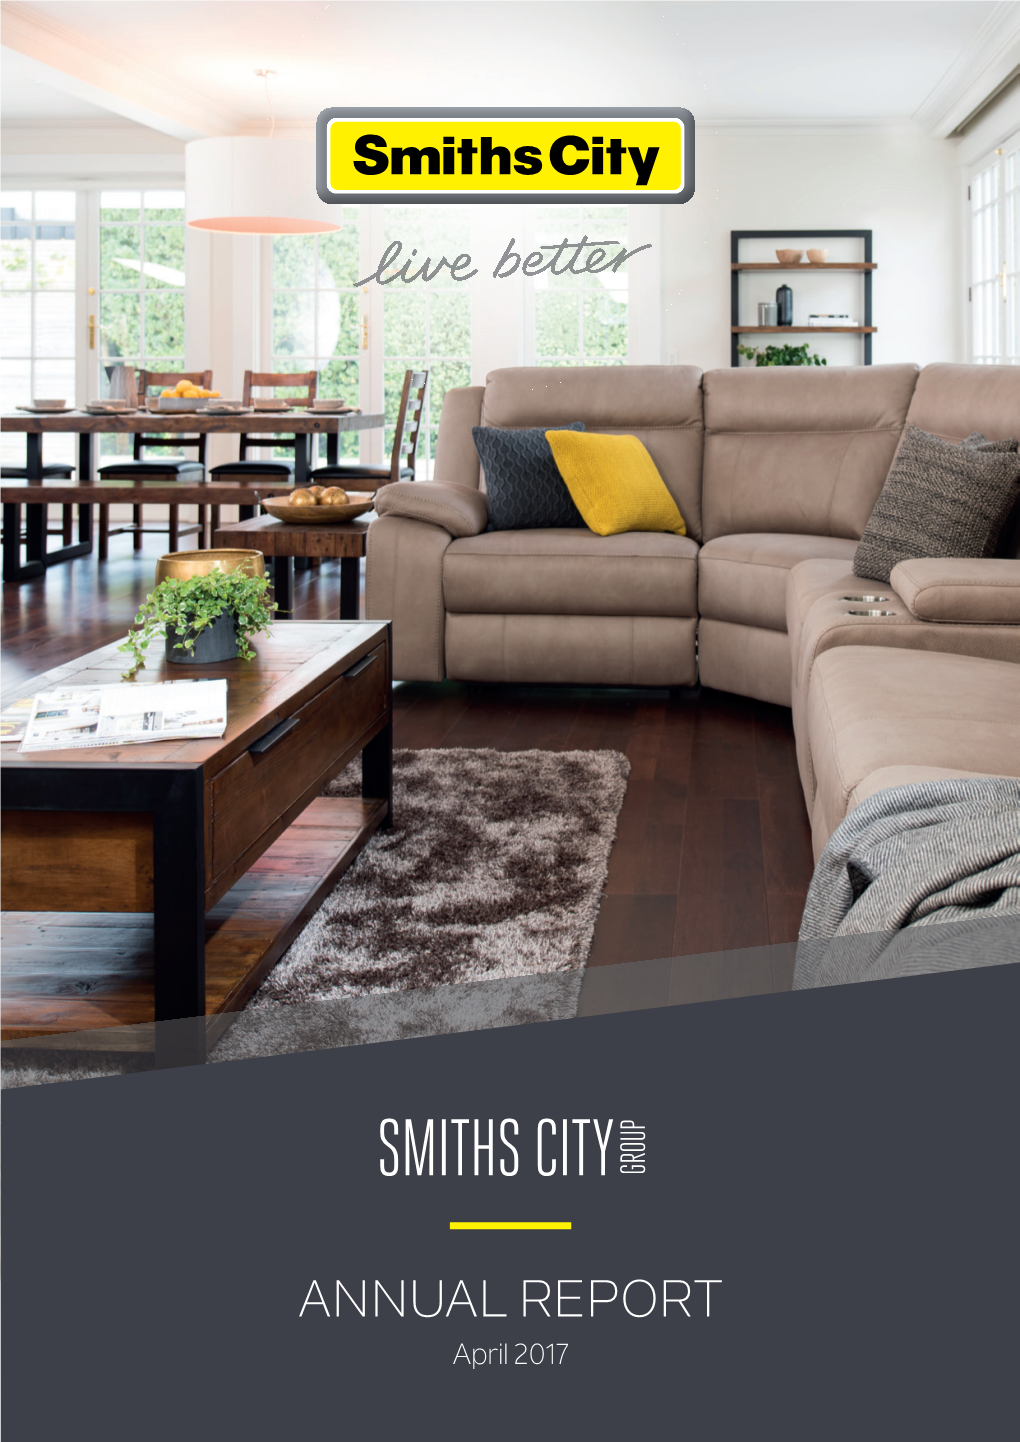 Smiths City Group